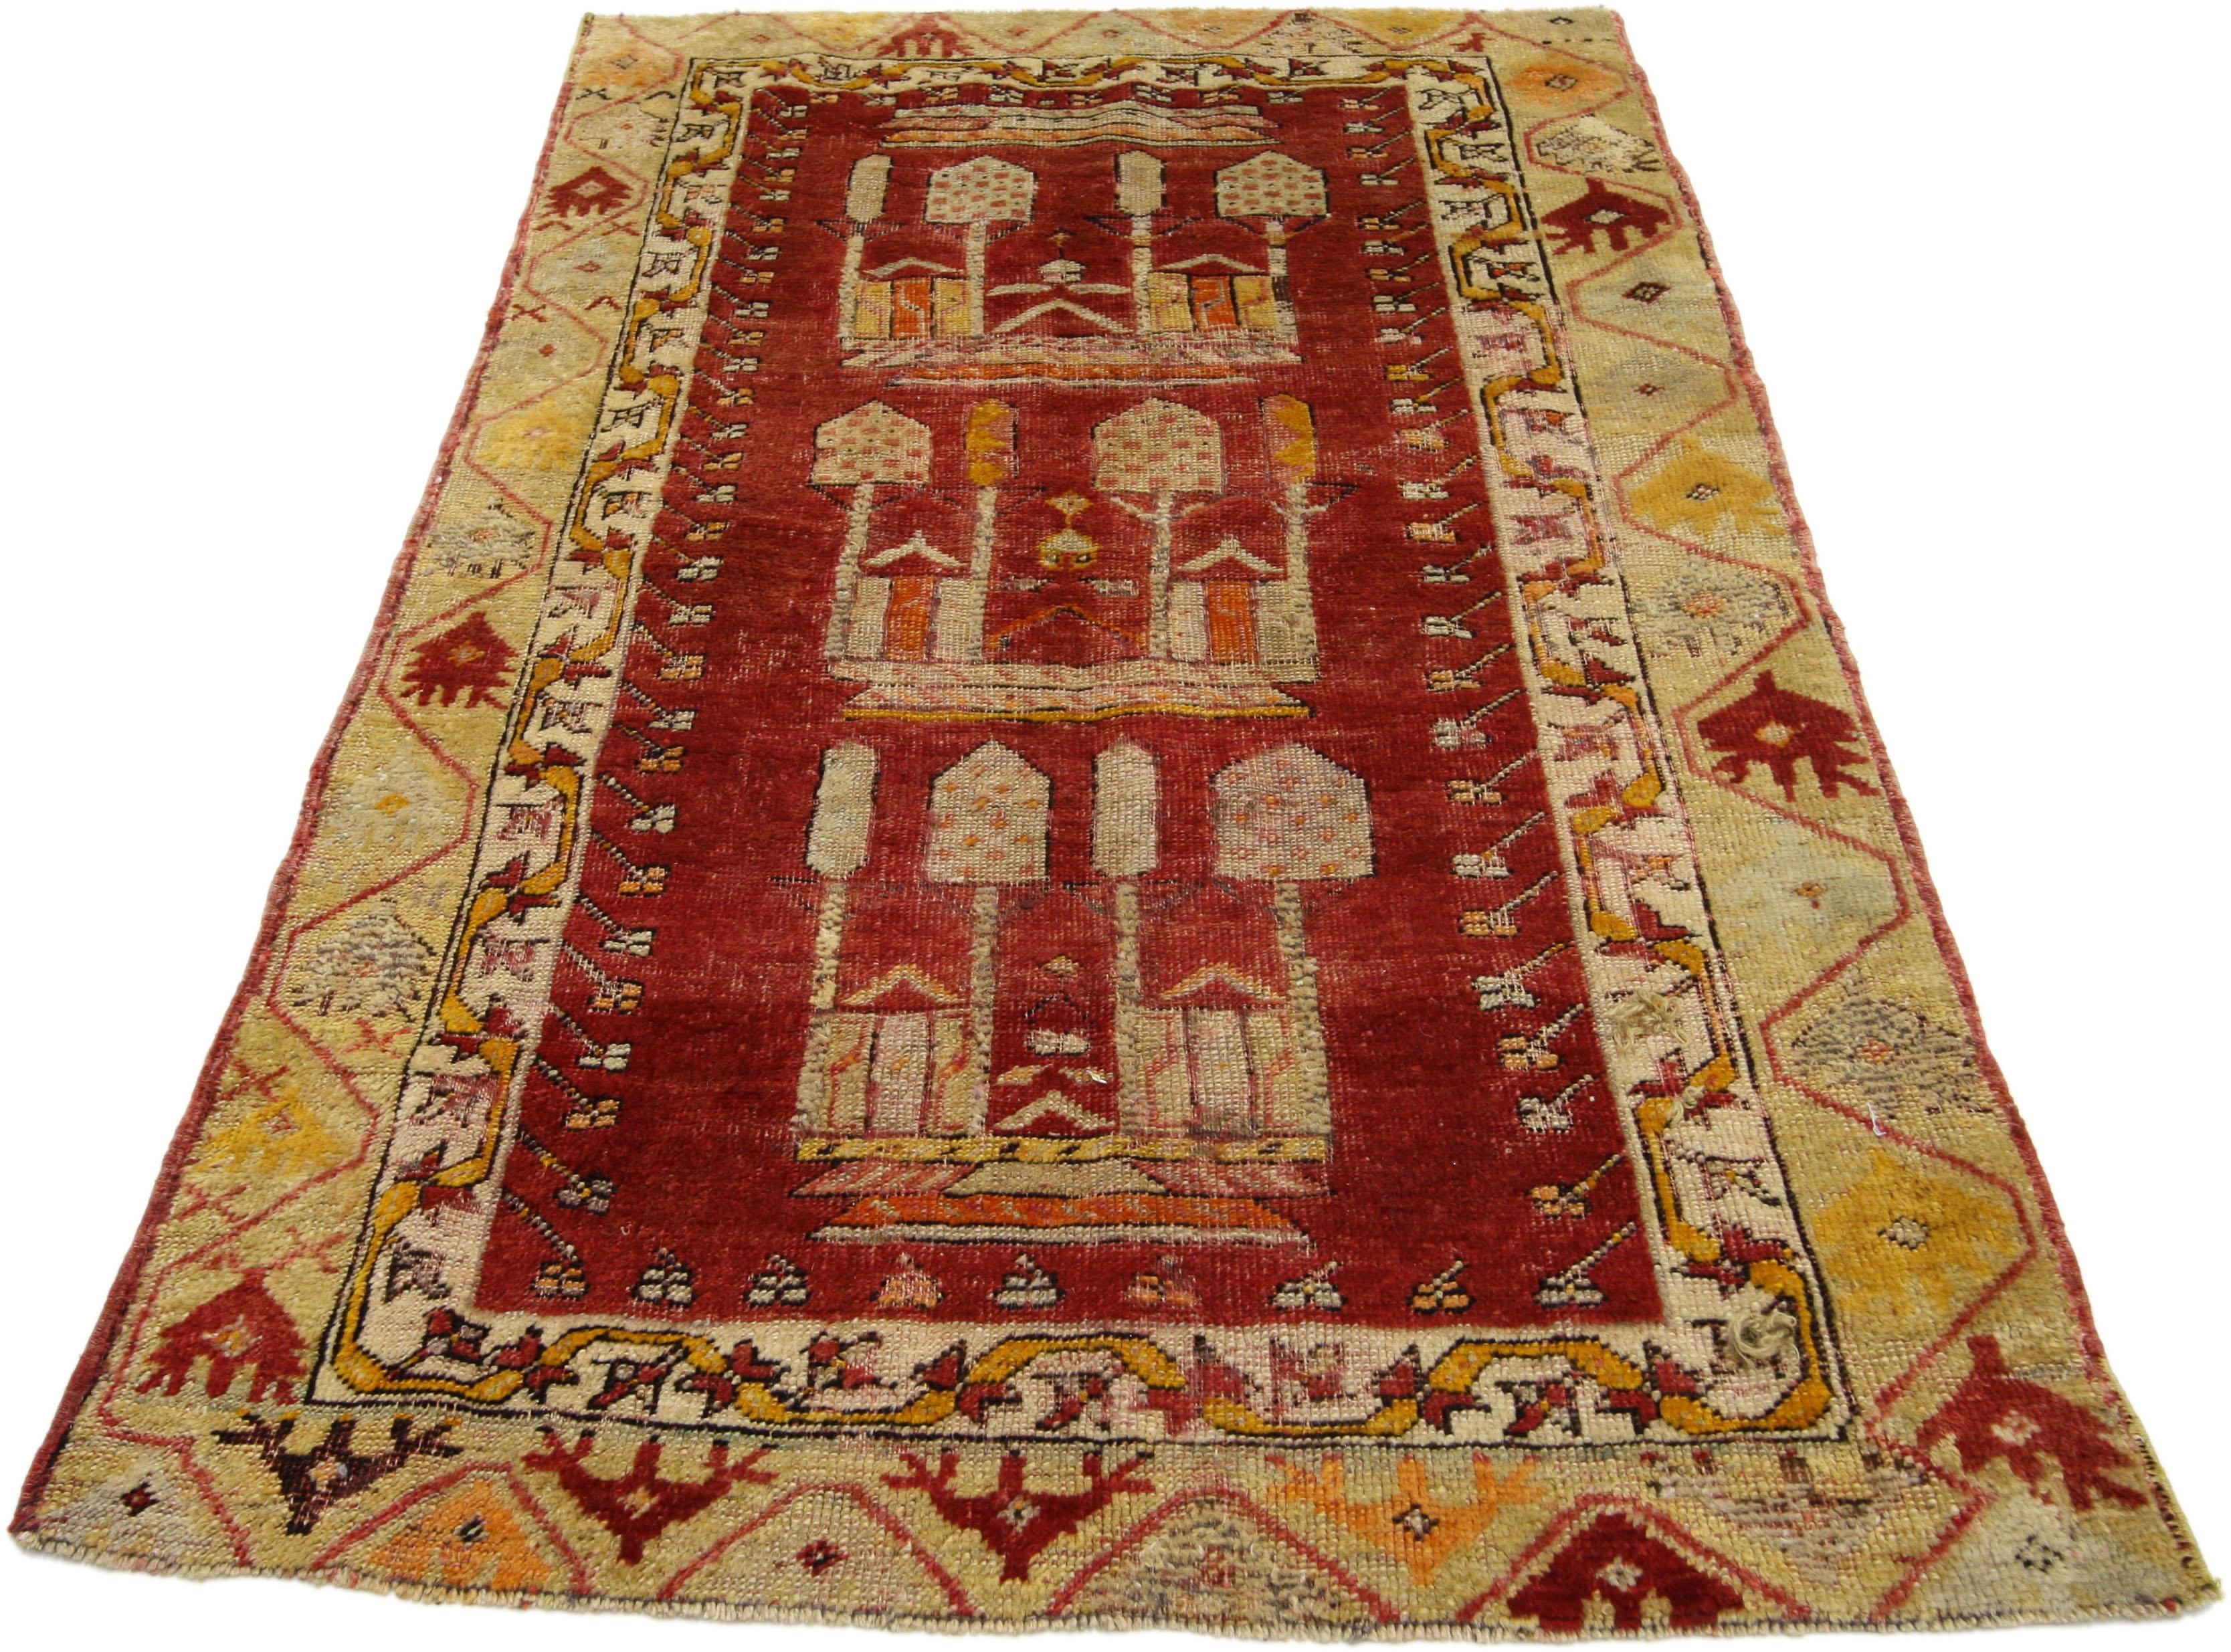 52295 Distressed Vintage Anatolian Kirsehir Prayer Rug with Graveyard Marker Design 02'08 x 04'08 From Esmaili Rugs Collection. This vintage Turkish Oushak rug features a modern traditional style and considered a Turkish Prayer rug. Immersed in